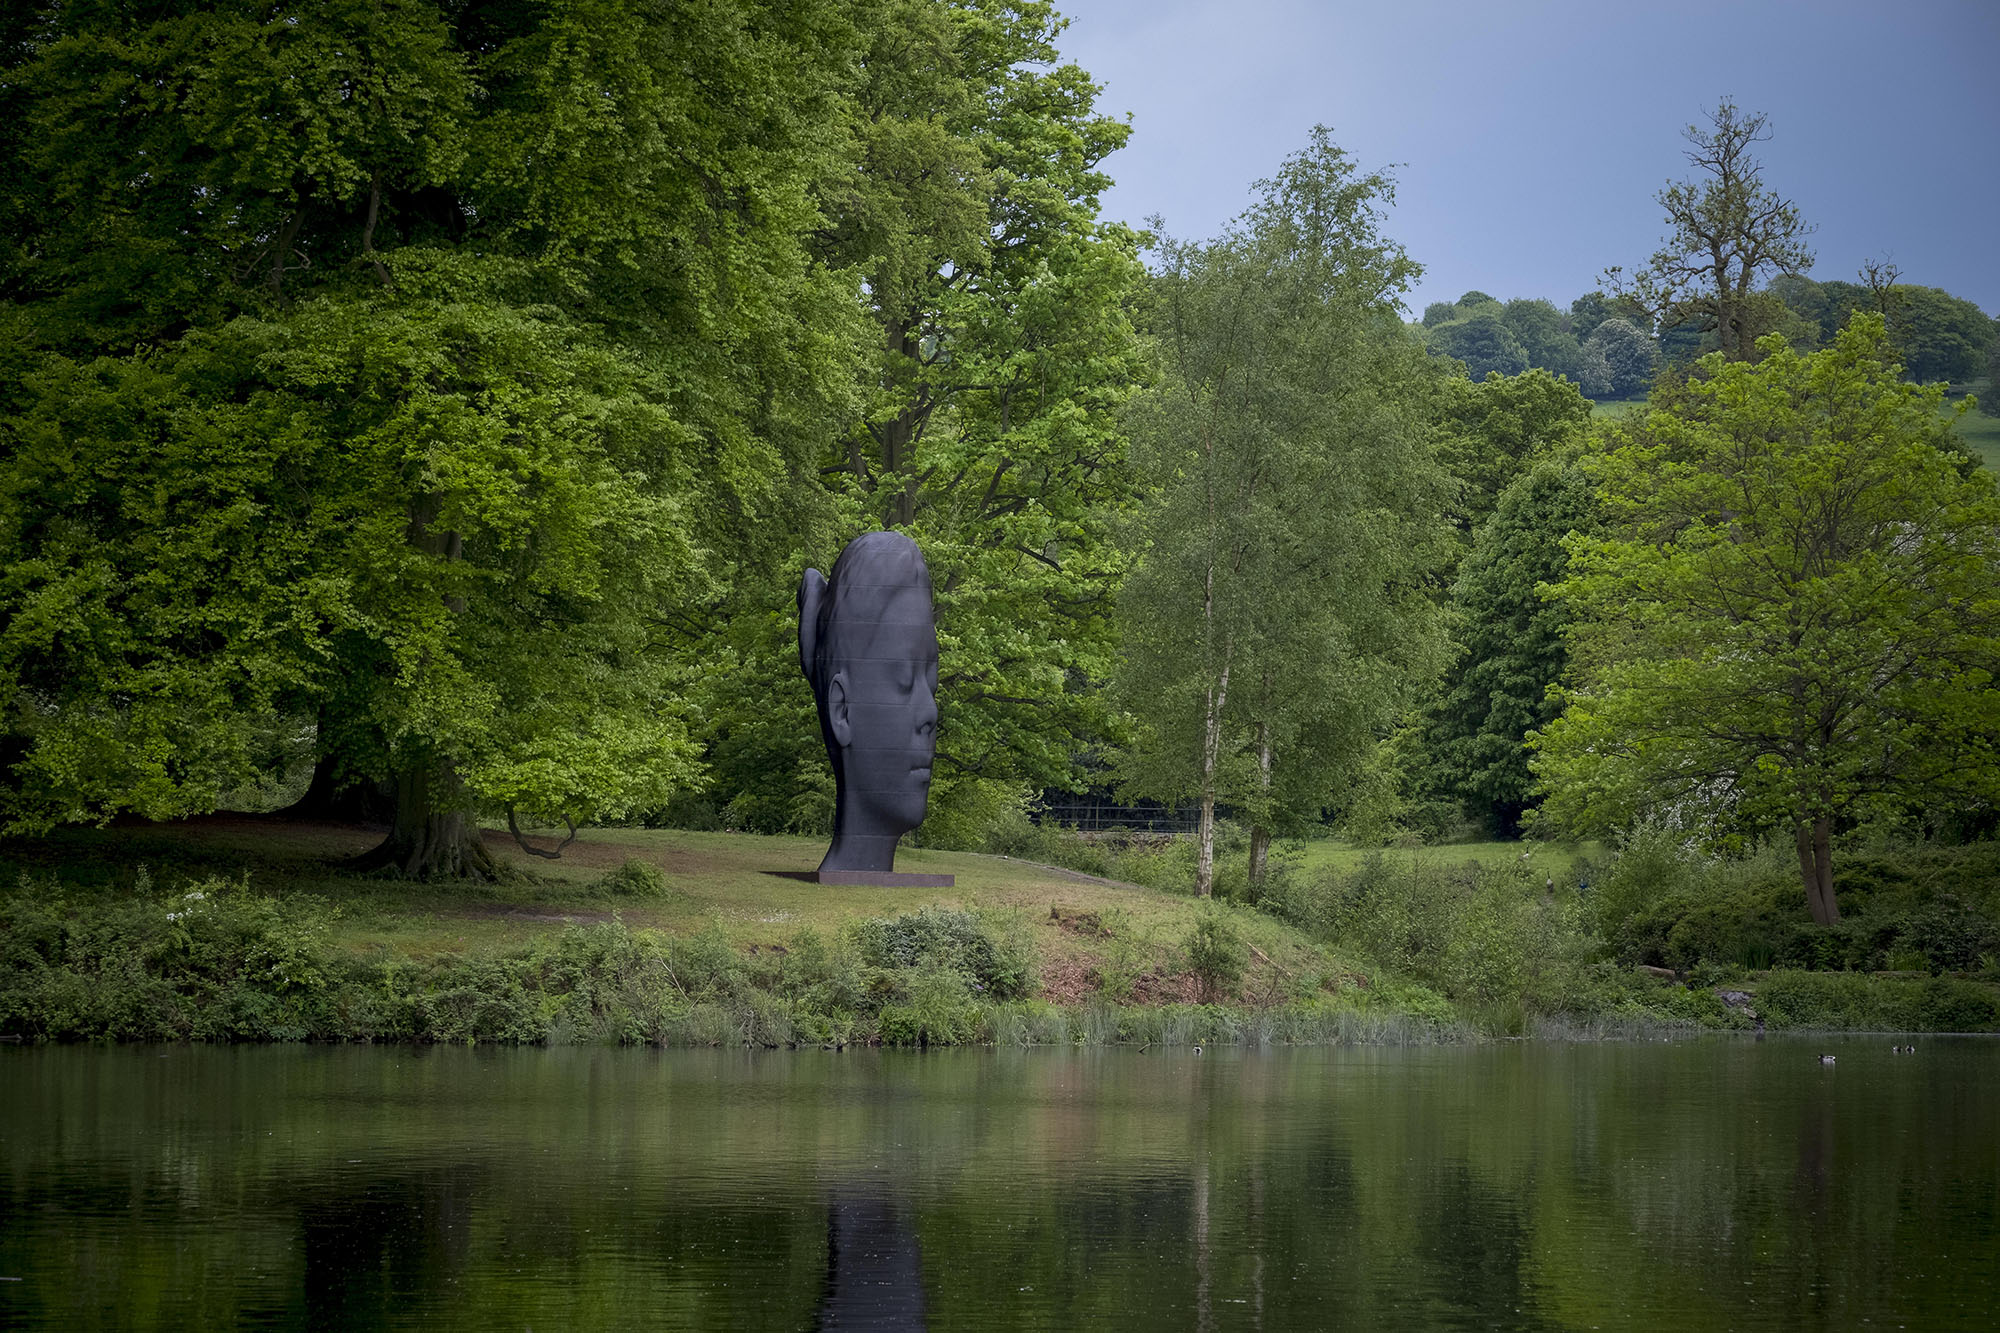 Large sculpture of woman's head looking out over a lake